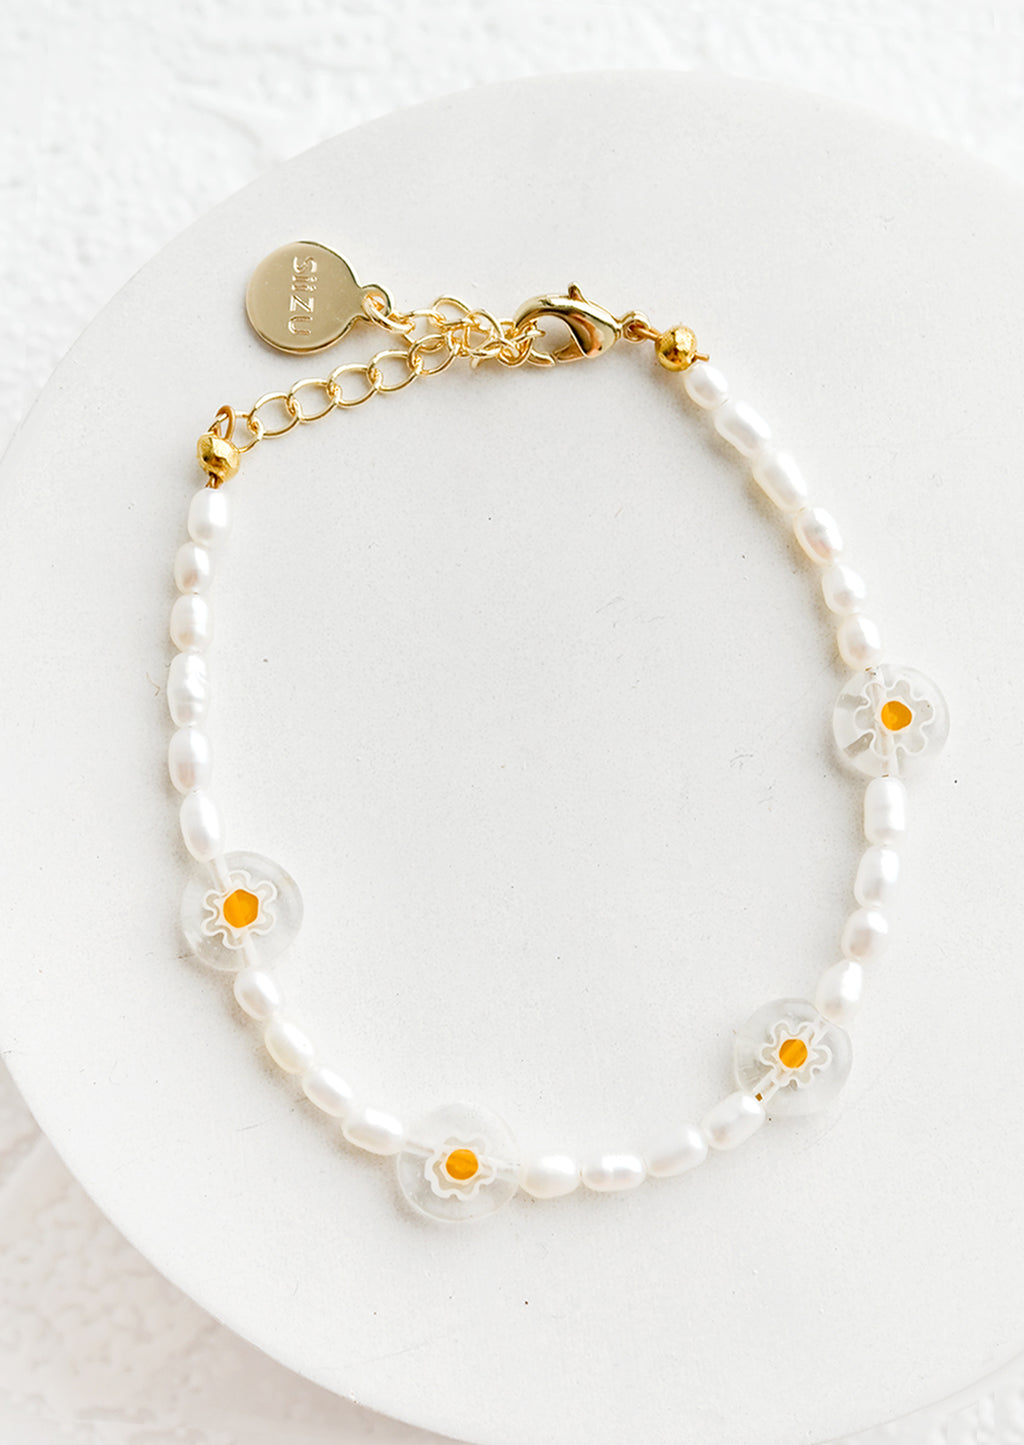 Yellow Flowers: A pearl beaded bracelet with clear millefiore glass daisy beads.